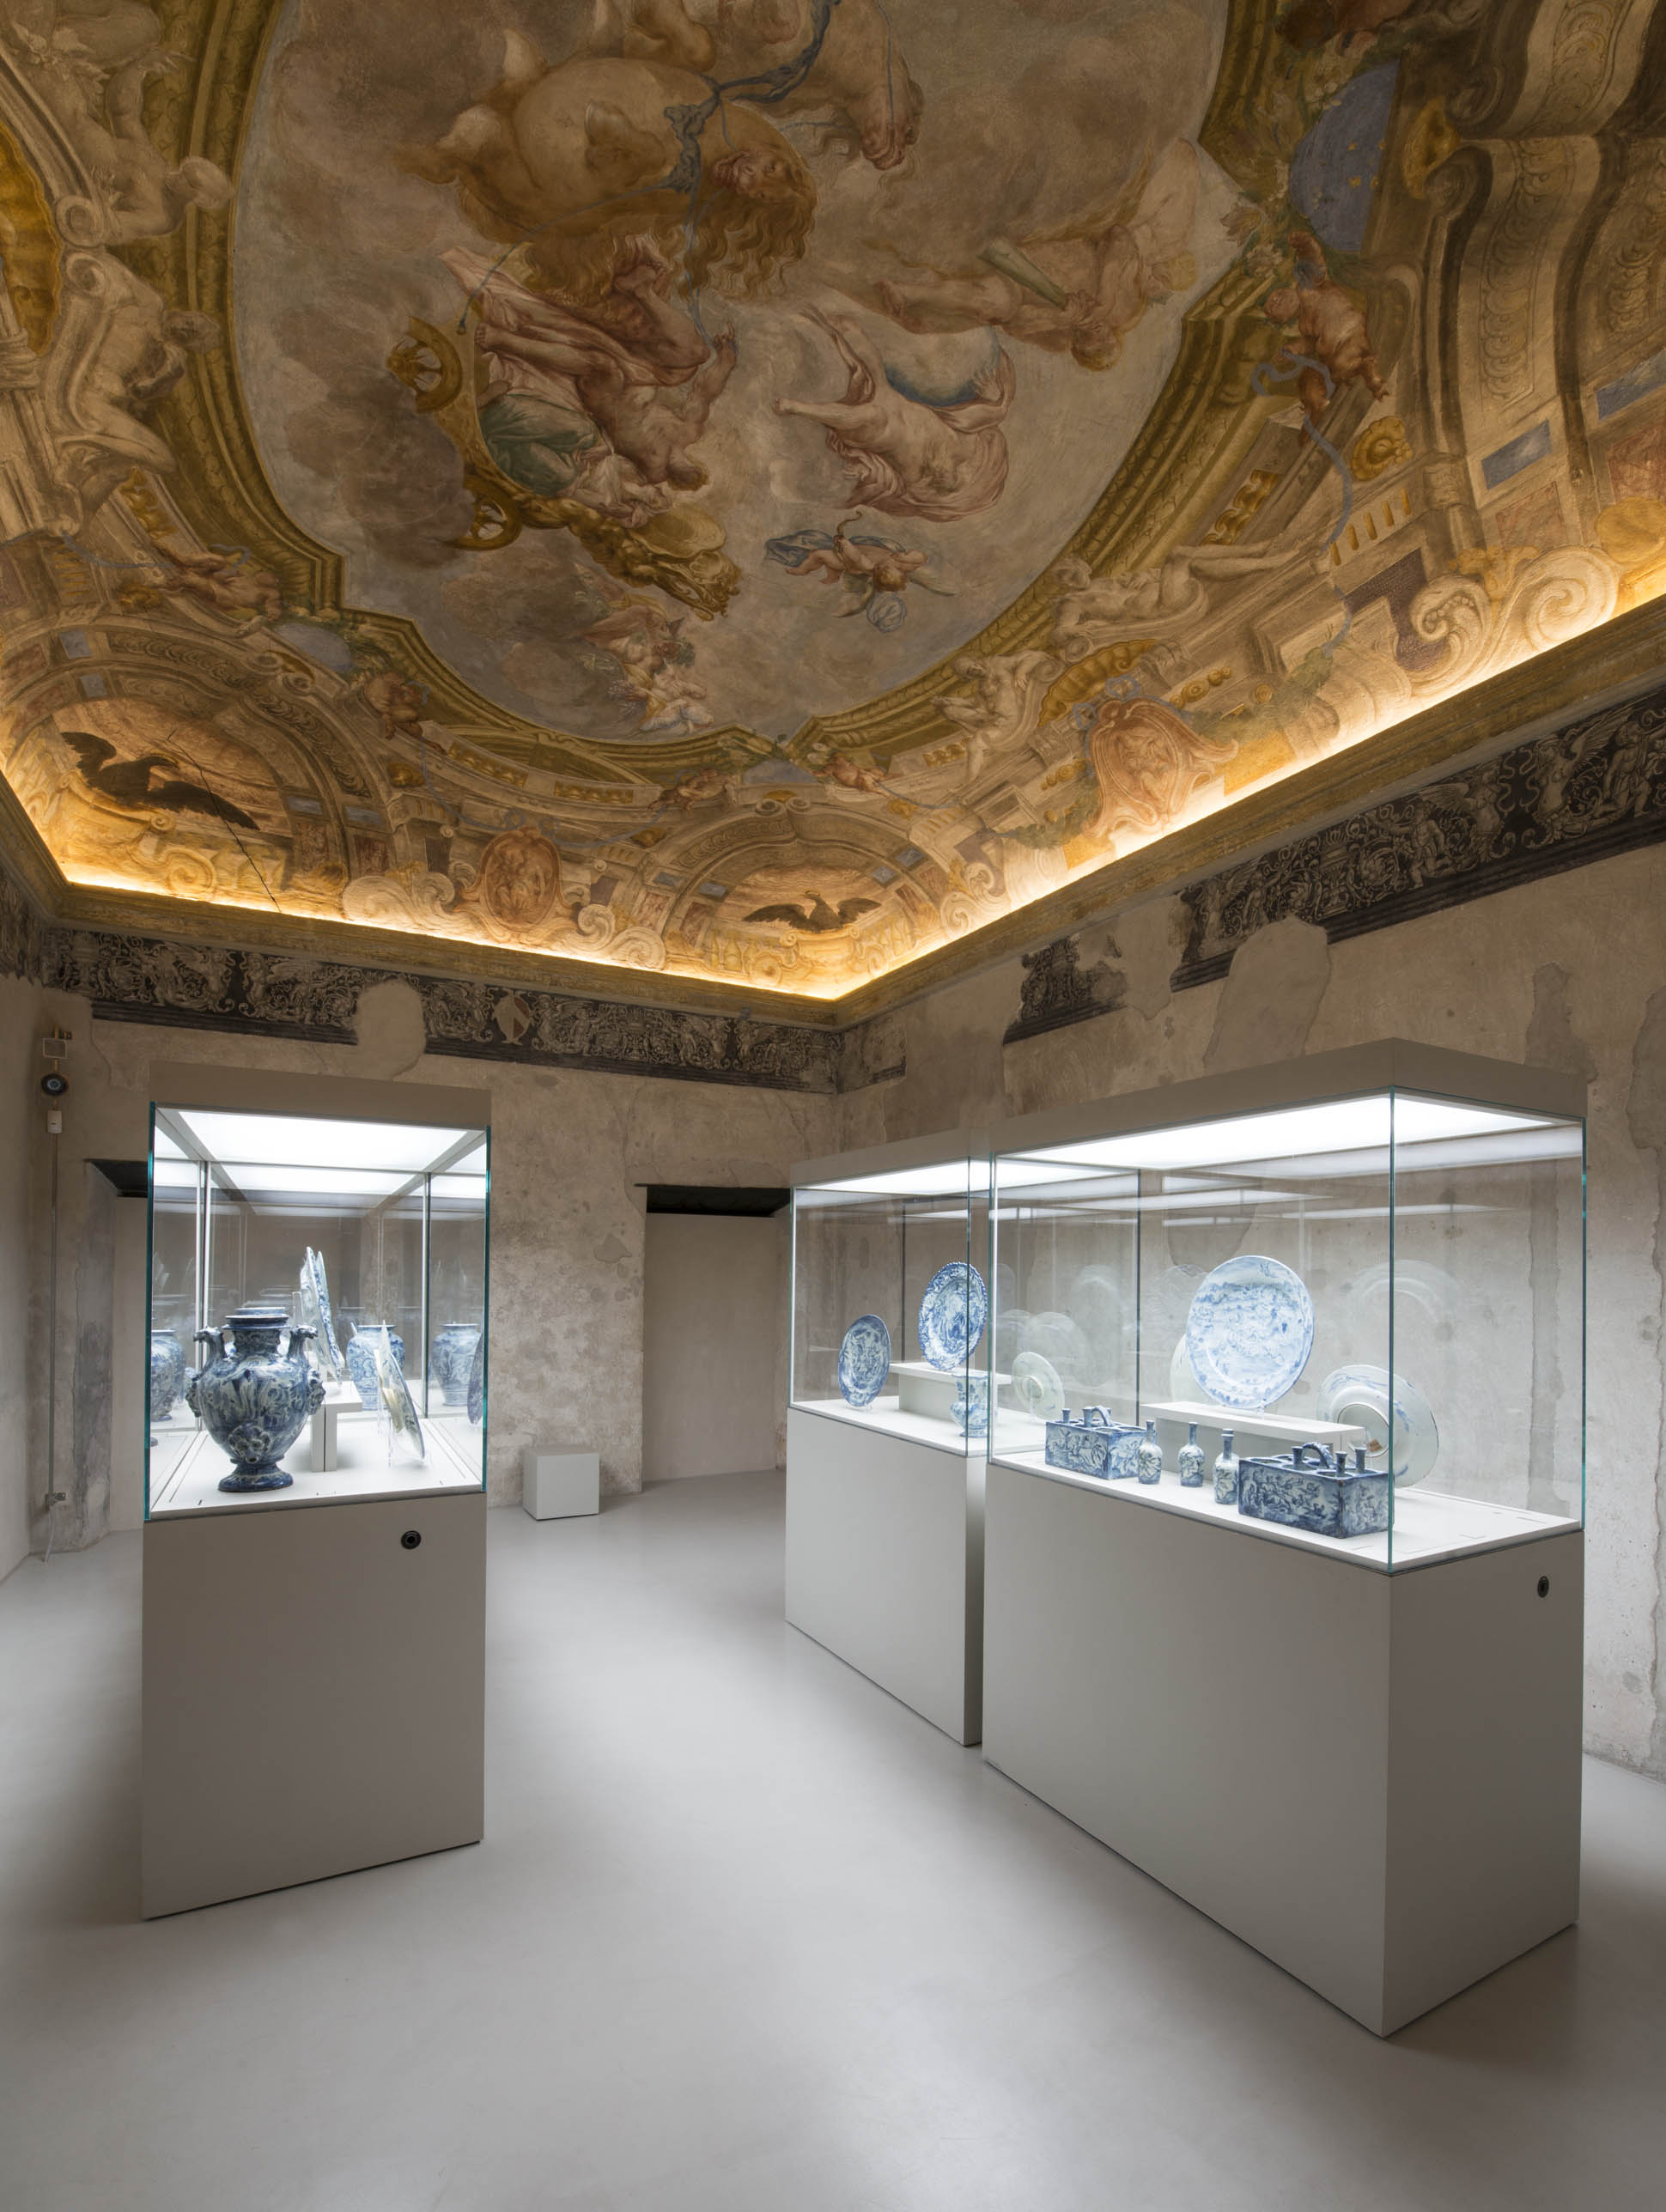 The Museum of Ceramics in Savona: the room with Bartolomeo Guidobono's fresco and plates attributed to him